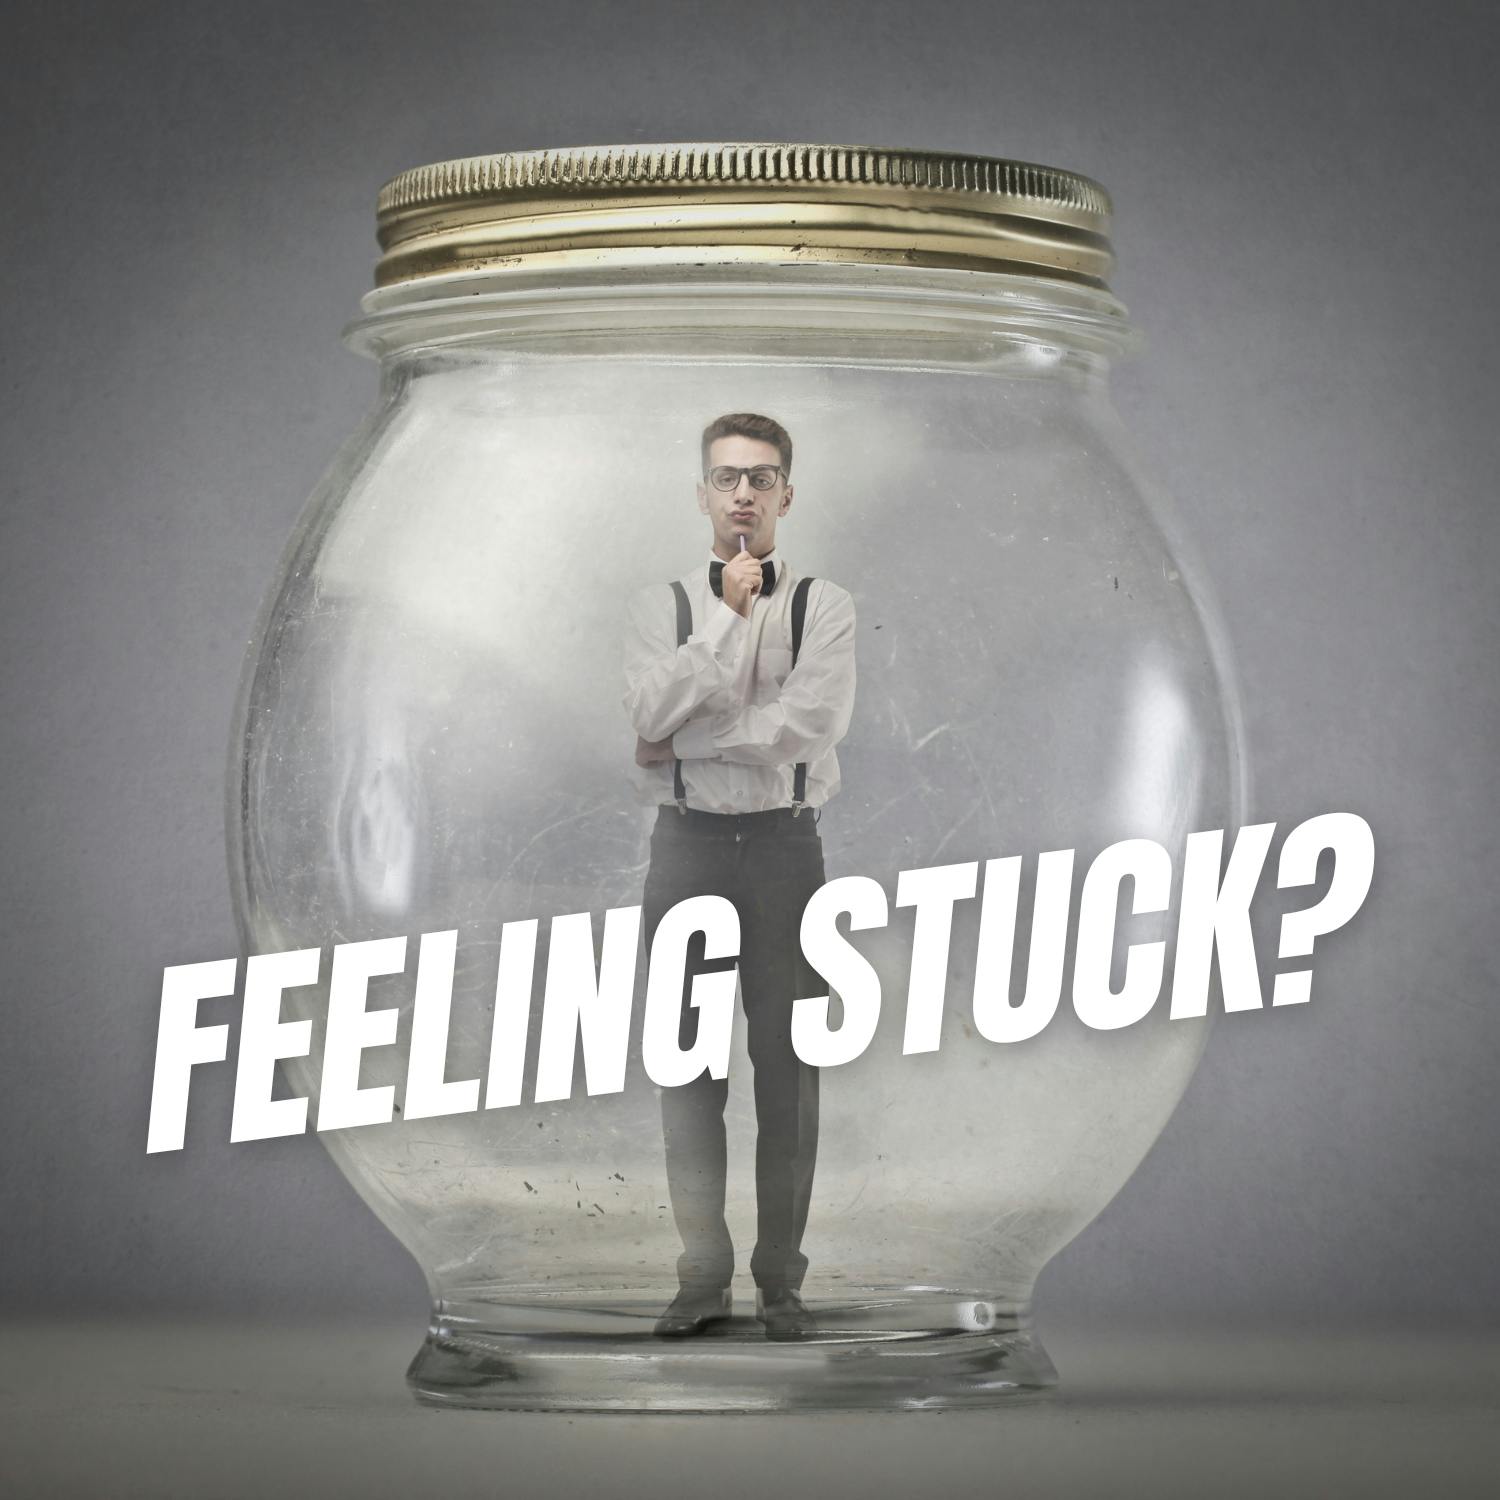 How to Find New Solutions When You’re Feeling Stuck